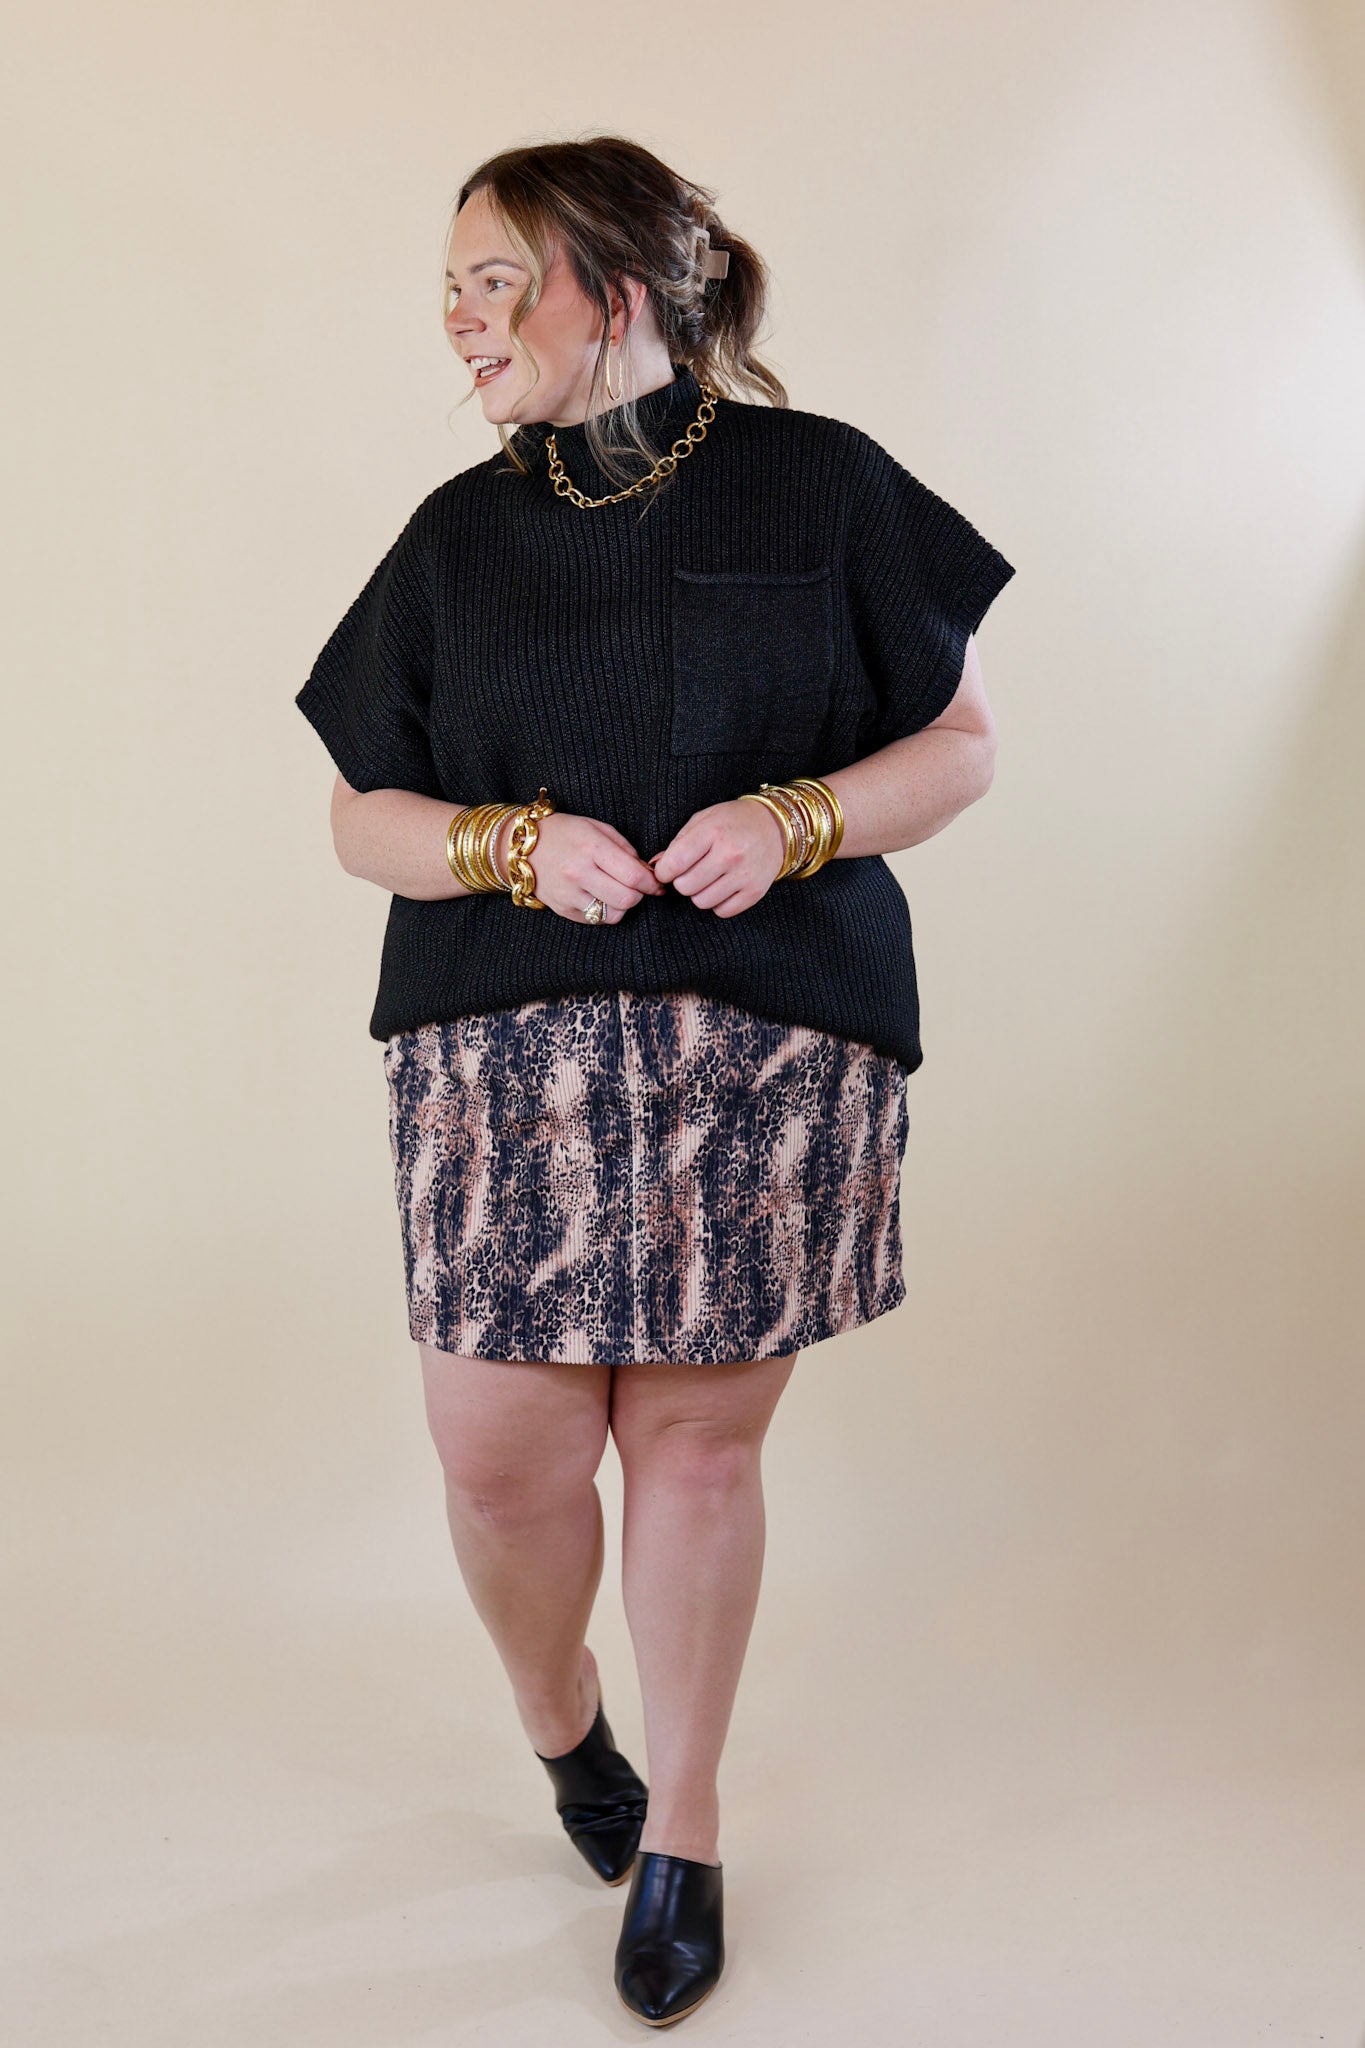 Chic Discovery Corduroy Animal Print Mini Skirt in Blush Pink and Black - Giddy Up Glamour Boutique